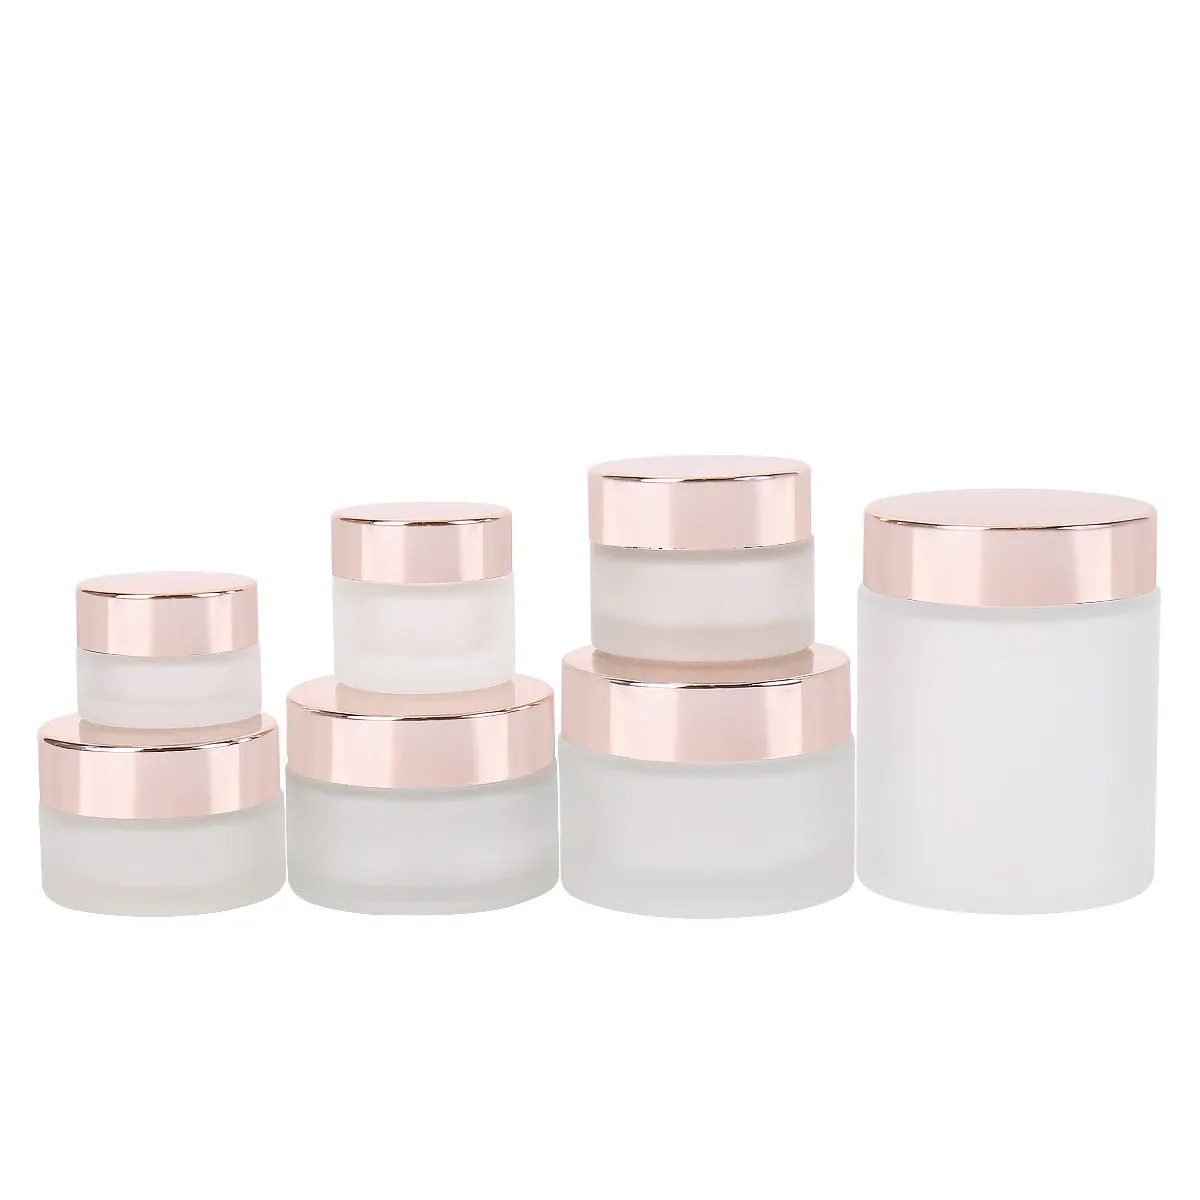 Bottles 6pcs/12pcs 5g 10g 15g 20g 30g 50g 100g Frosted Glass Cream Makeup Face Bottles Cosmetic Packing Container with RoseGold Lid